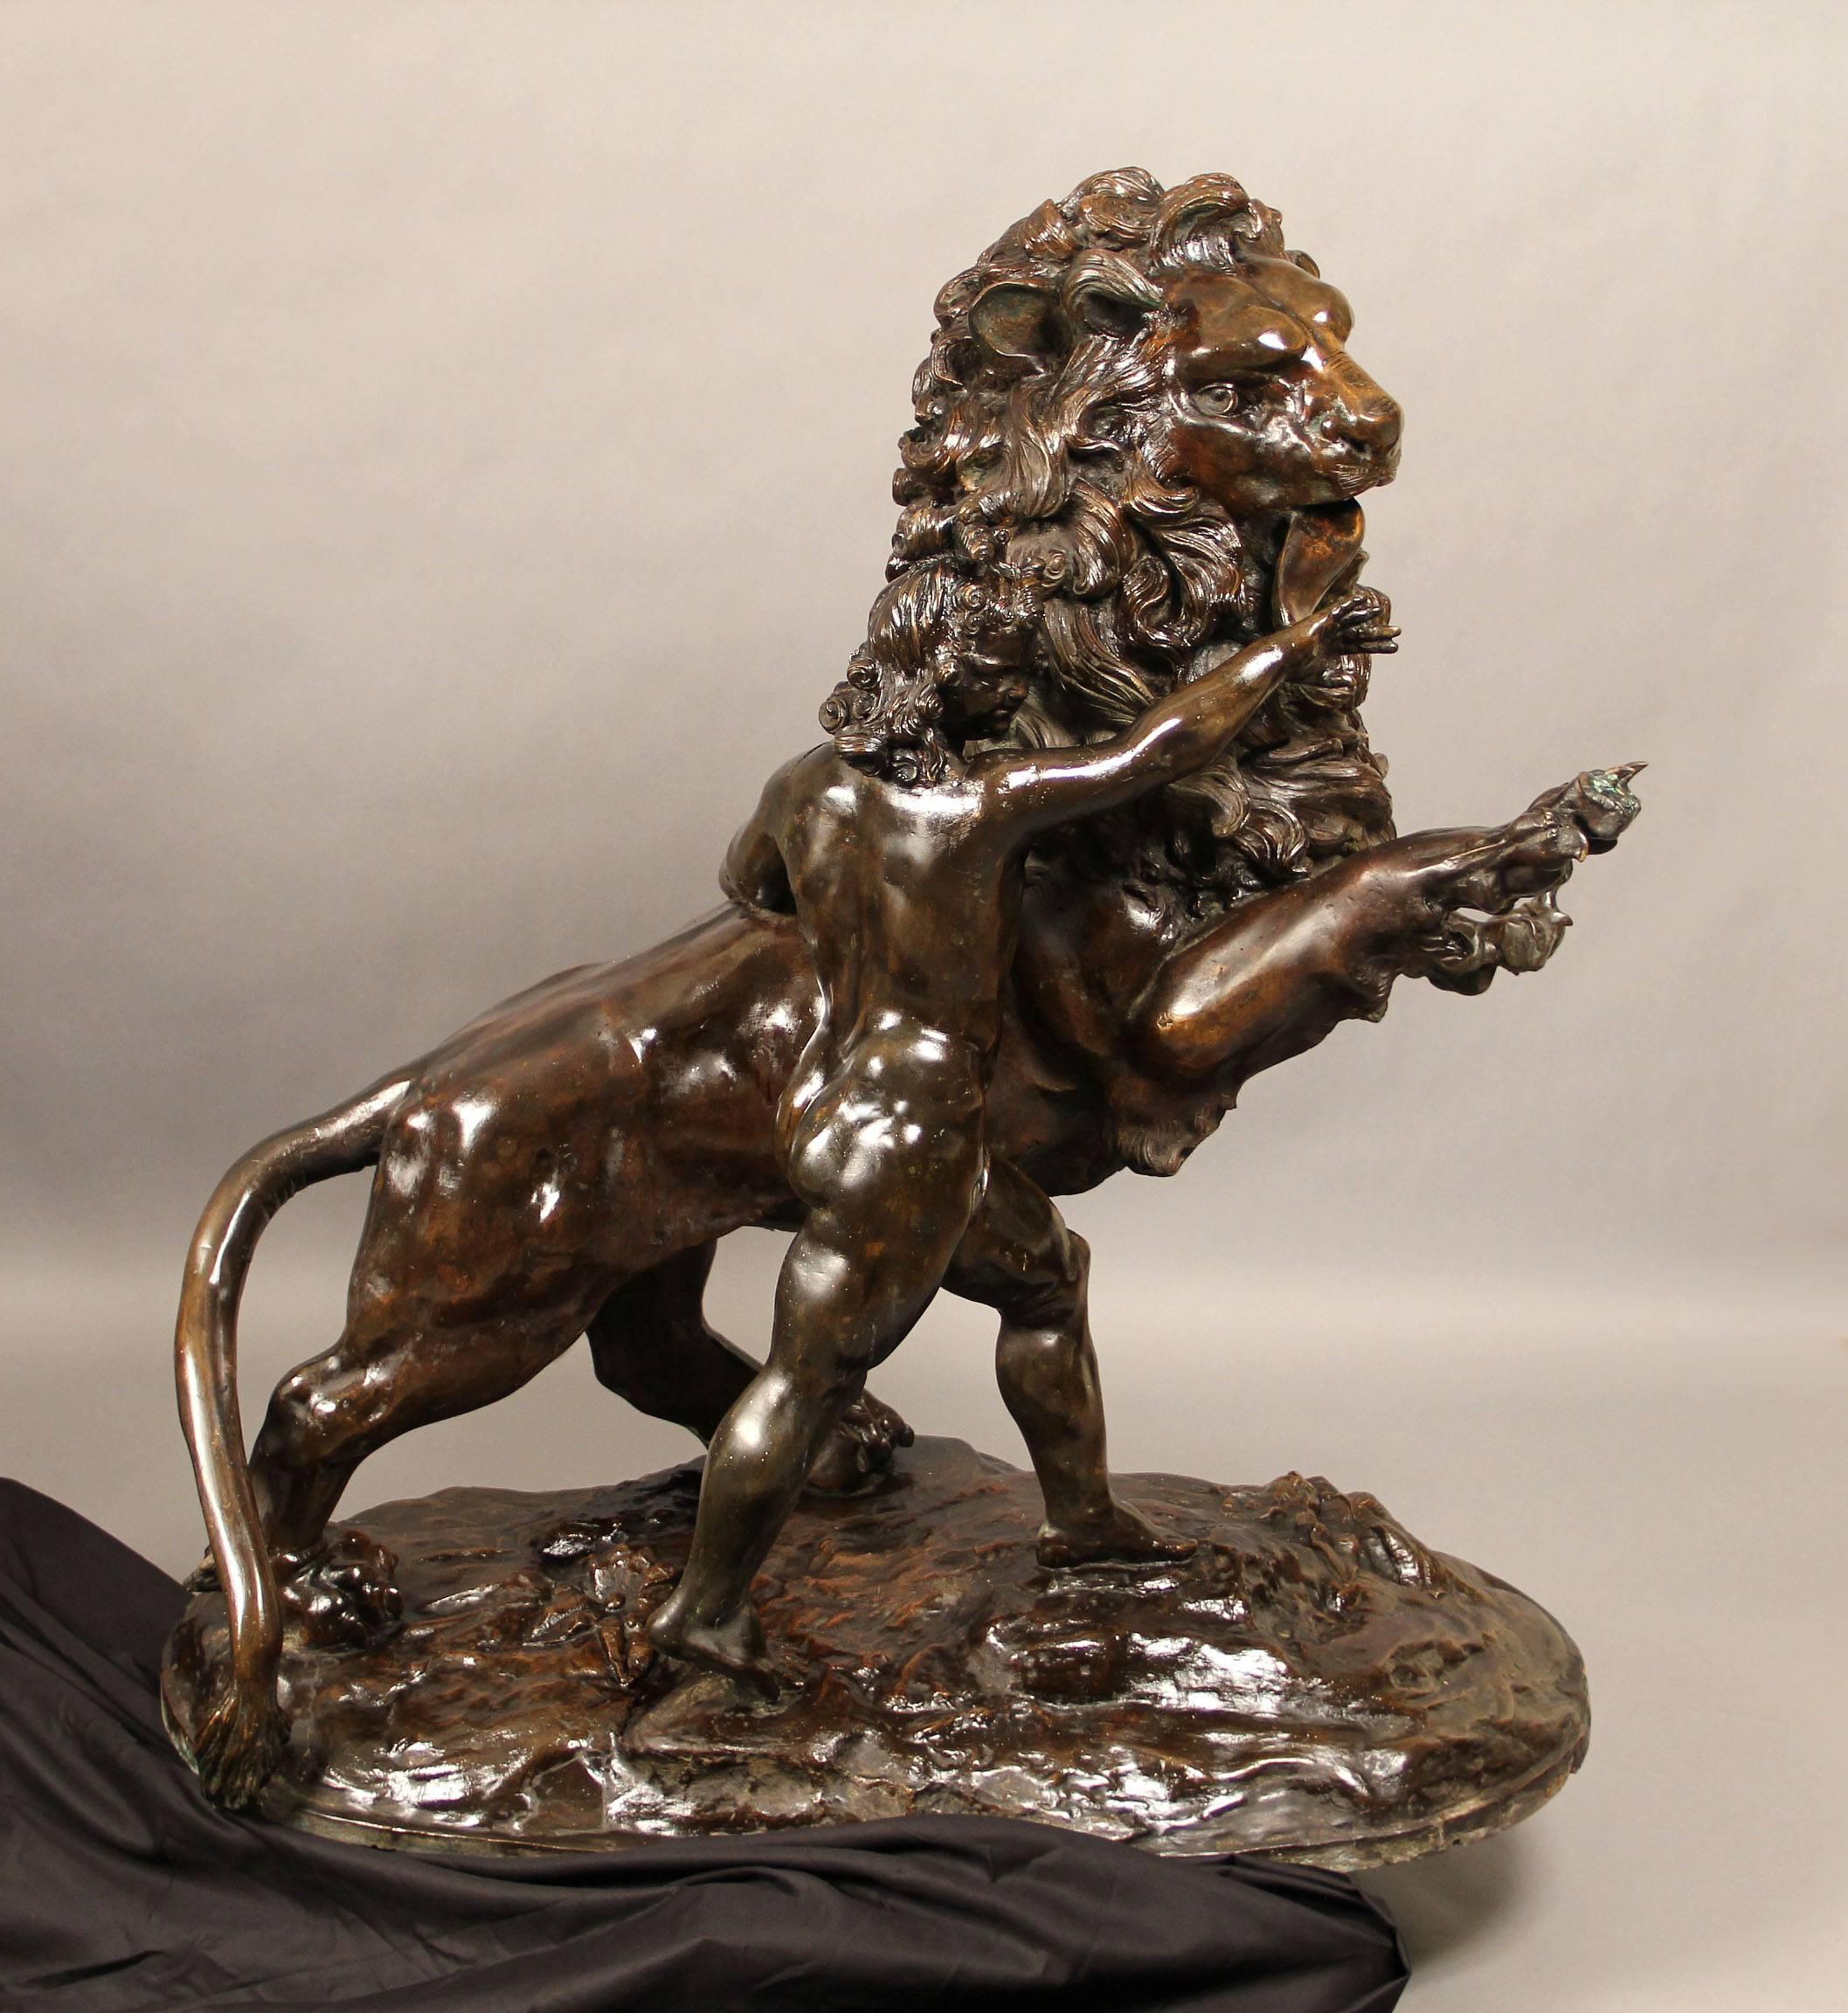 A large pair of early 20th century bronzes of a lion and tiger.

Both animals on their hind legs and front paws in the air, the tiger with a boy at its side, the lion with a girl at its side, standing on a large bronze base.